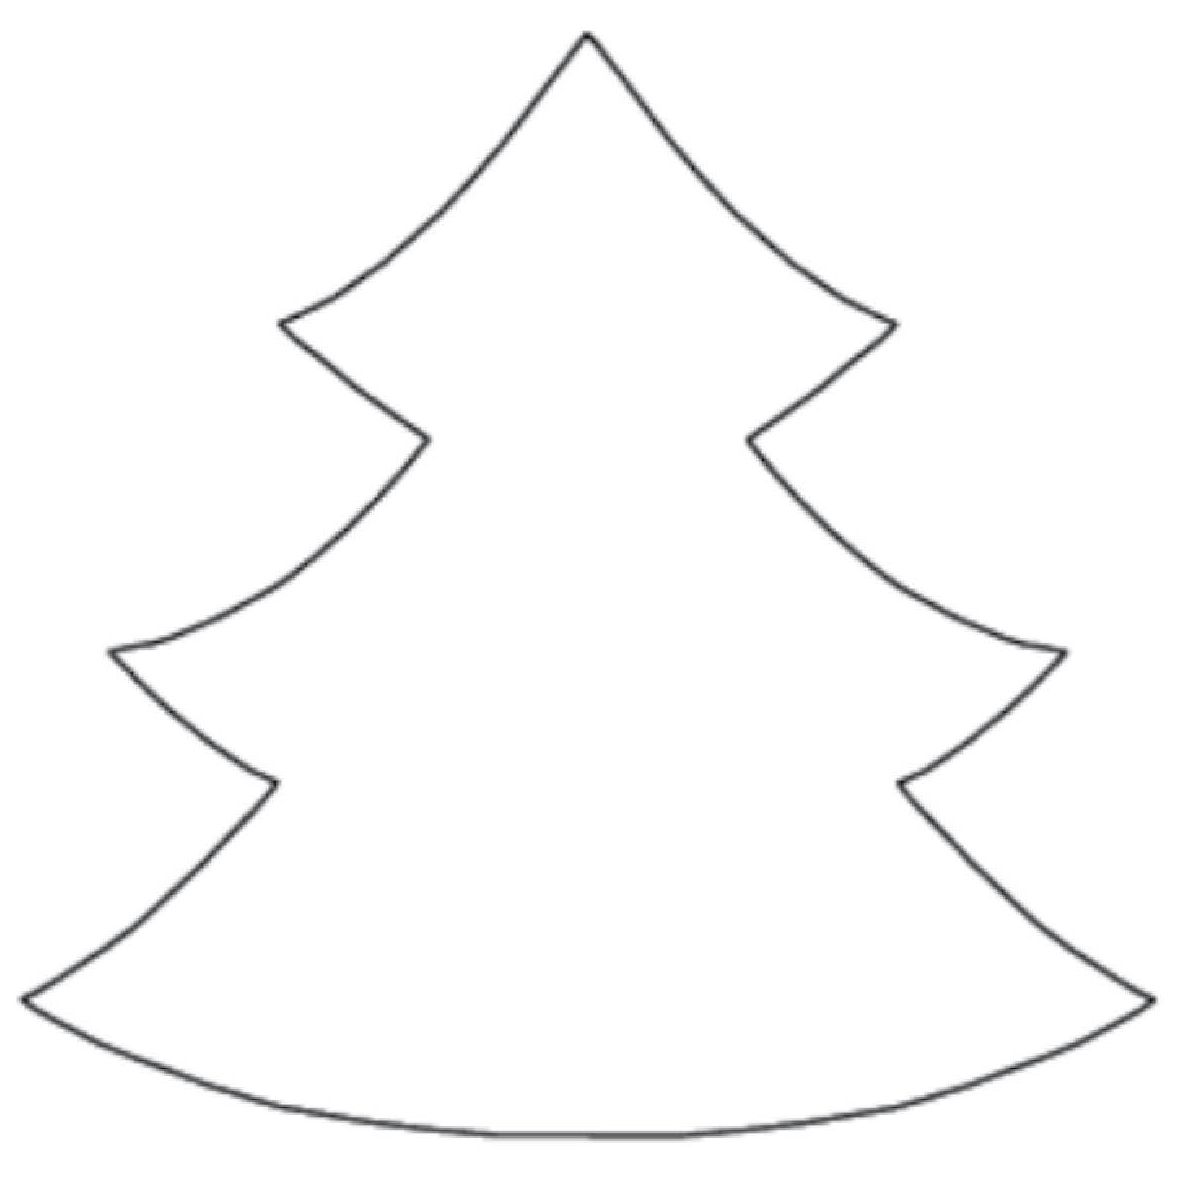 Free Christmas Tree Outlines, Download Free Clip Art, Free